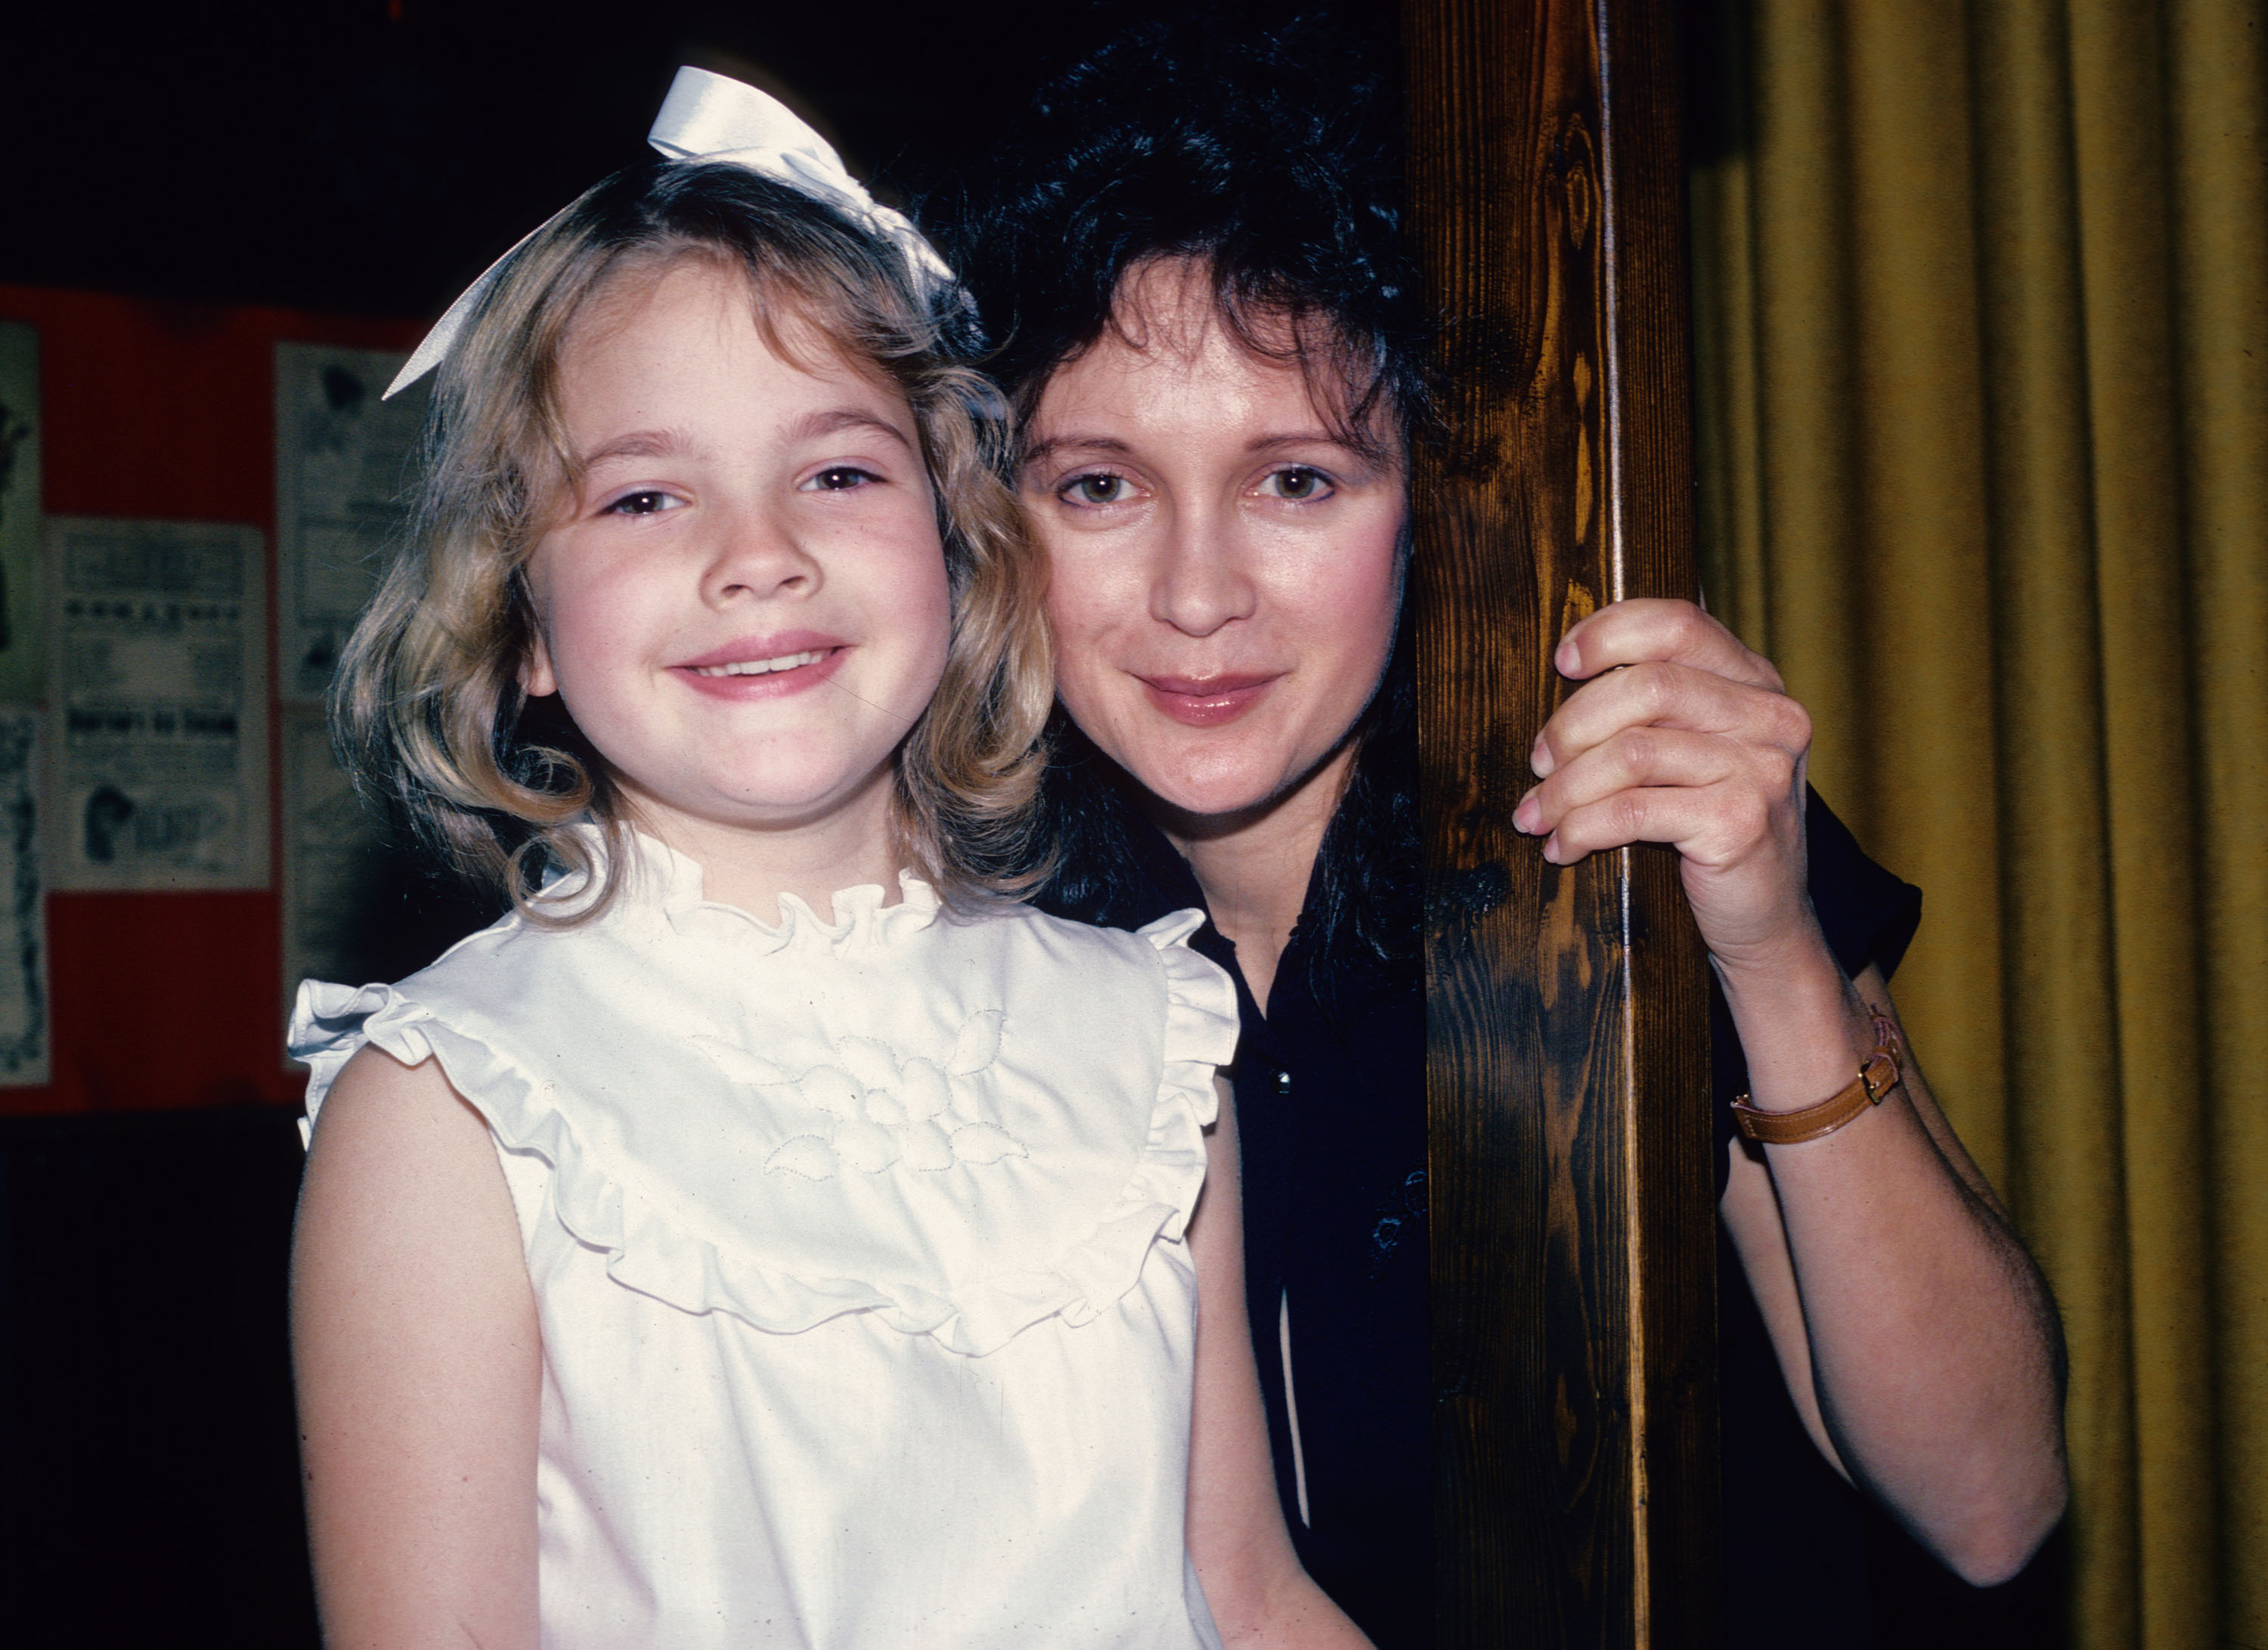 Drew Barrymore and Jaid Barrymore pose for a photograph in New York City, on June 8, 1982. | Source: Getty Images